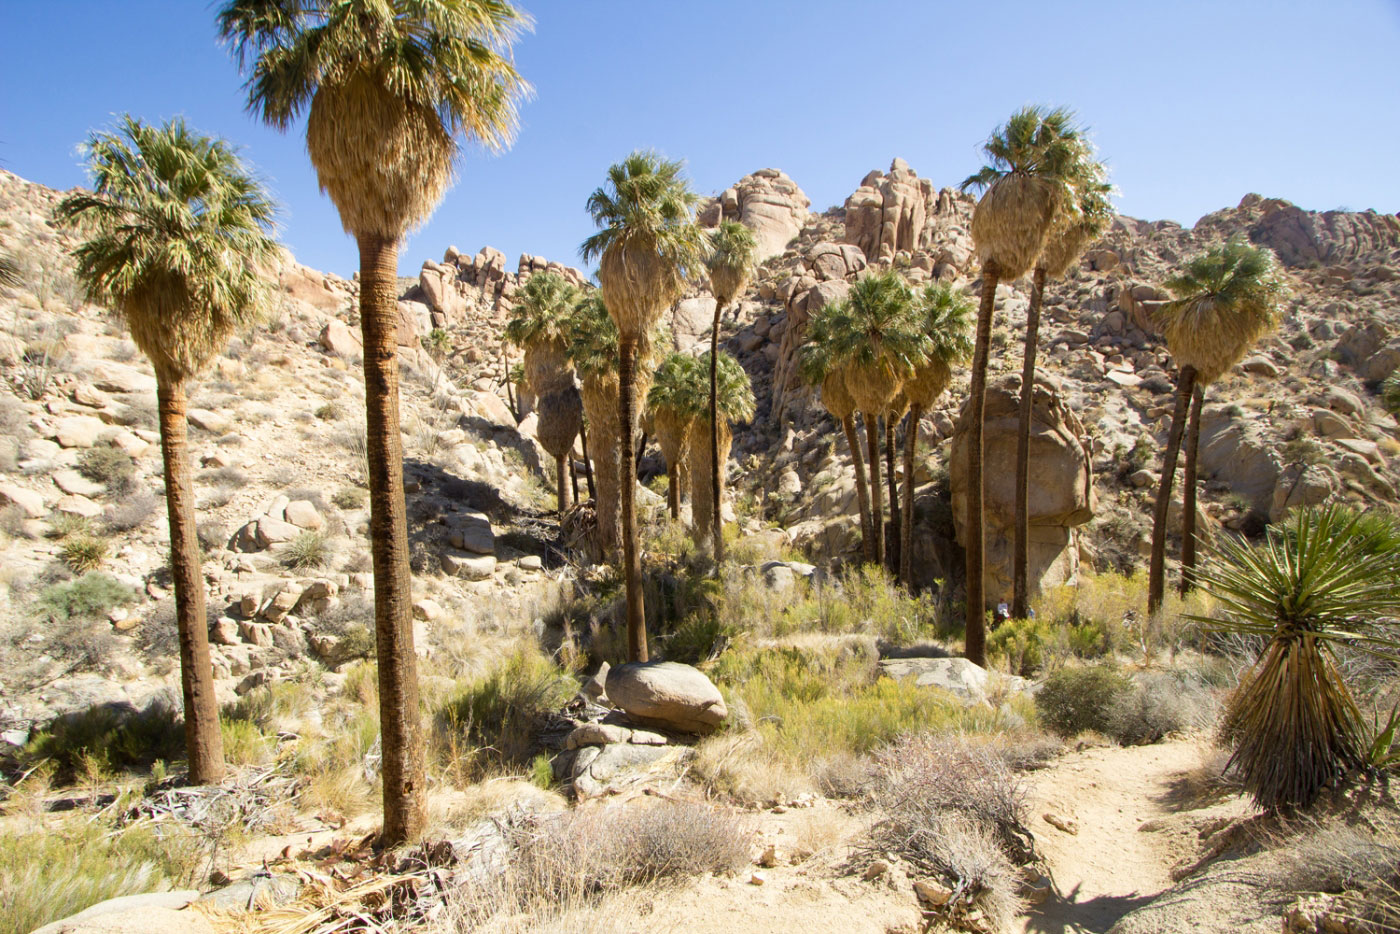 Hike Lost Palms Oasis in Joshua Tree National Park, California - Stav is Lost